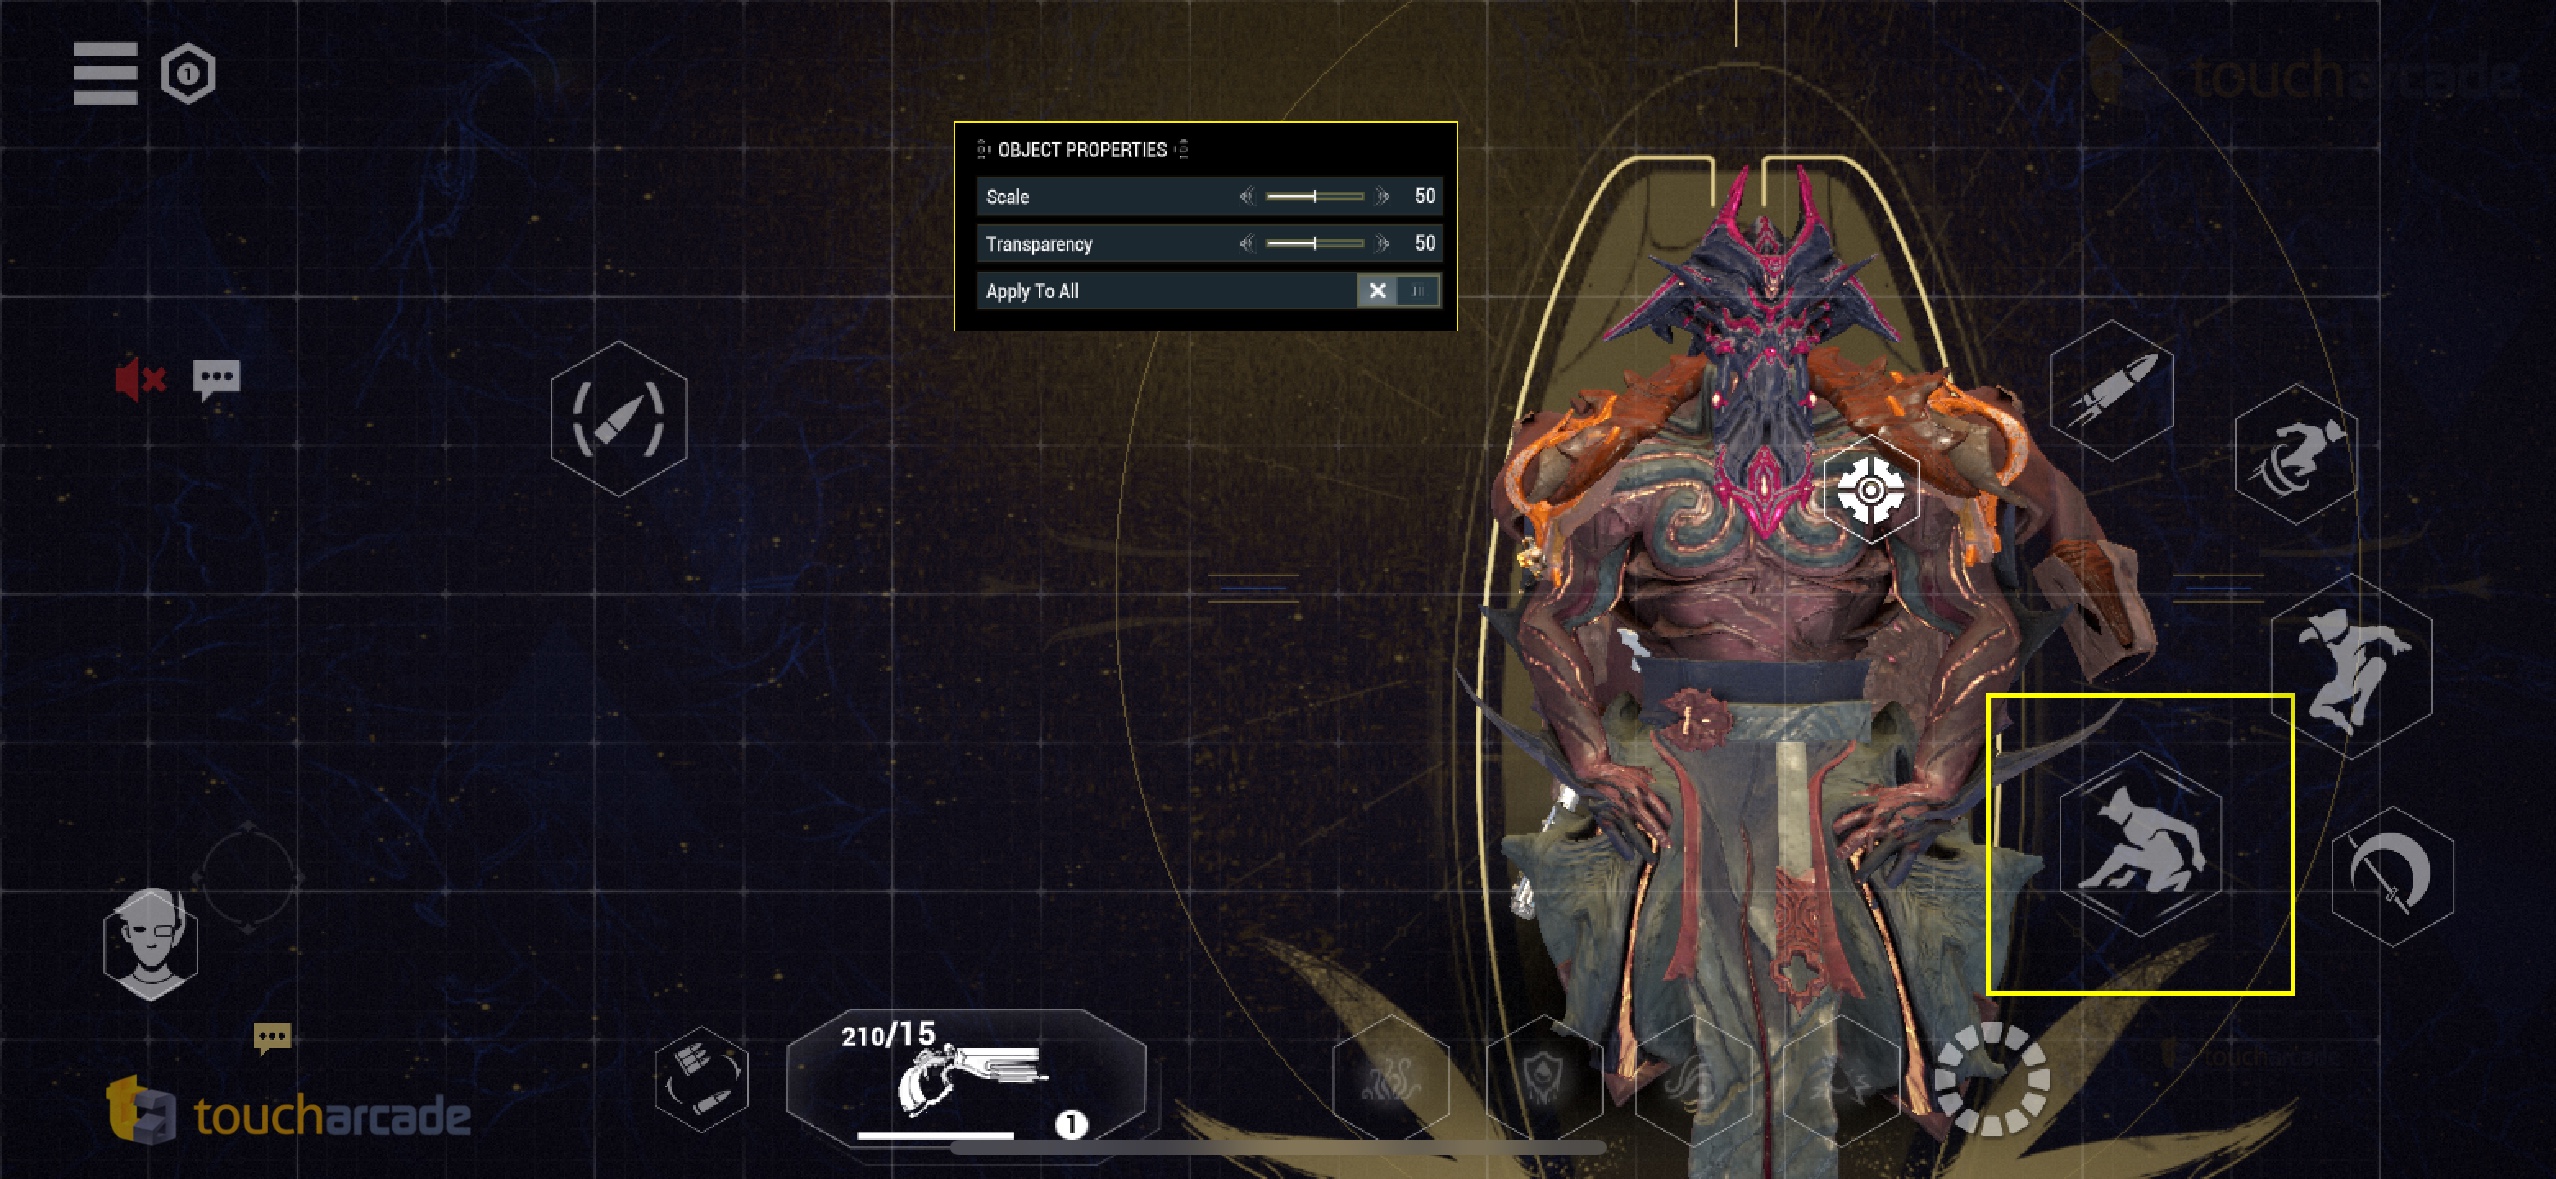 warframe-iphone-15-pro-gameplay-review-port-ui-scale-controls.jpg